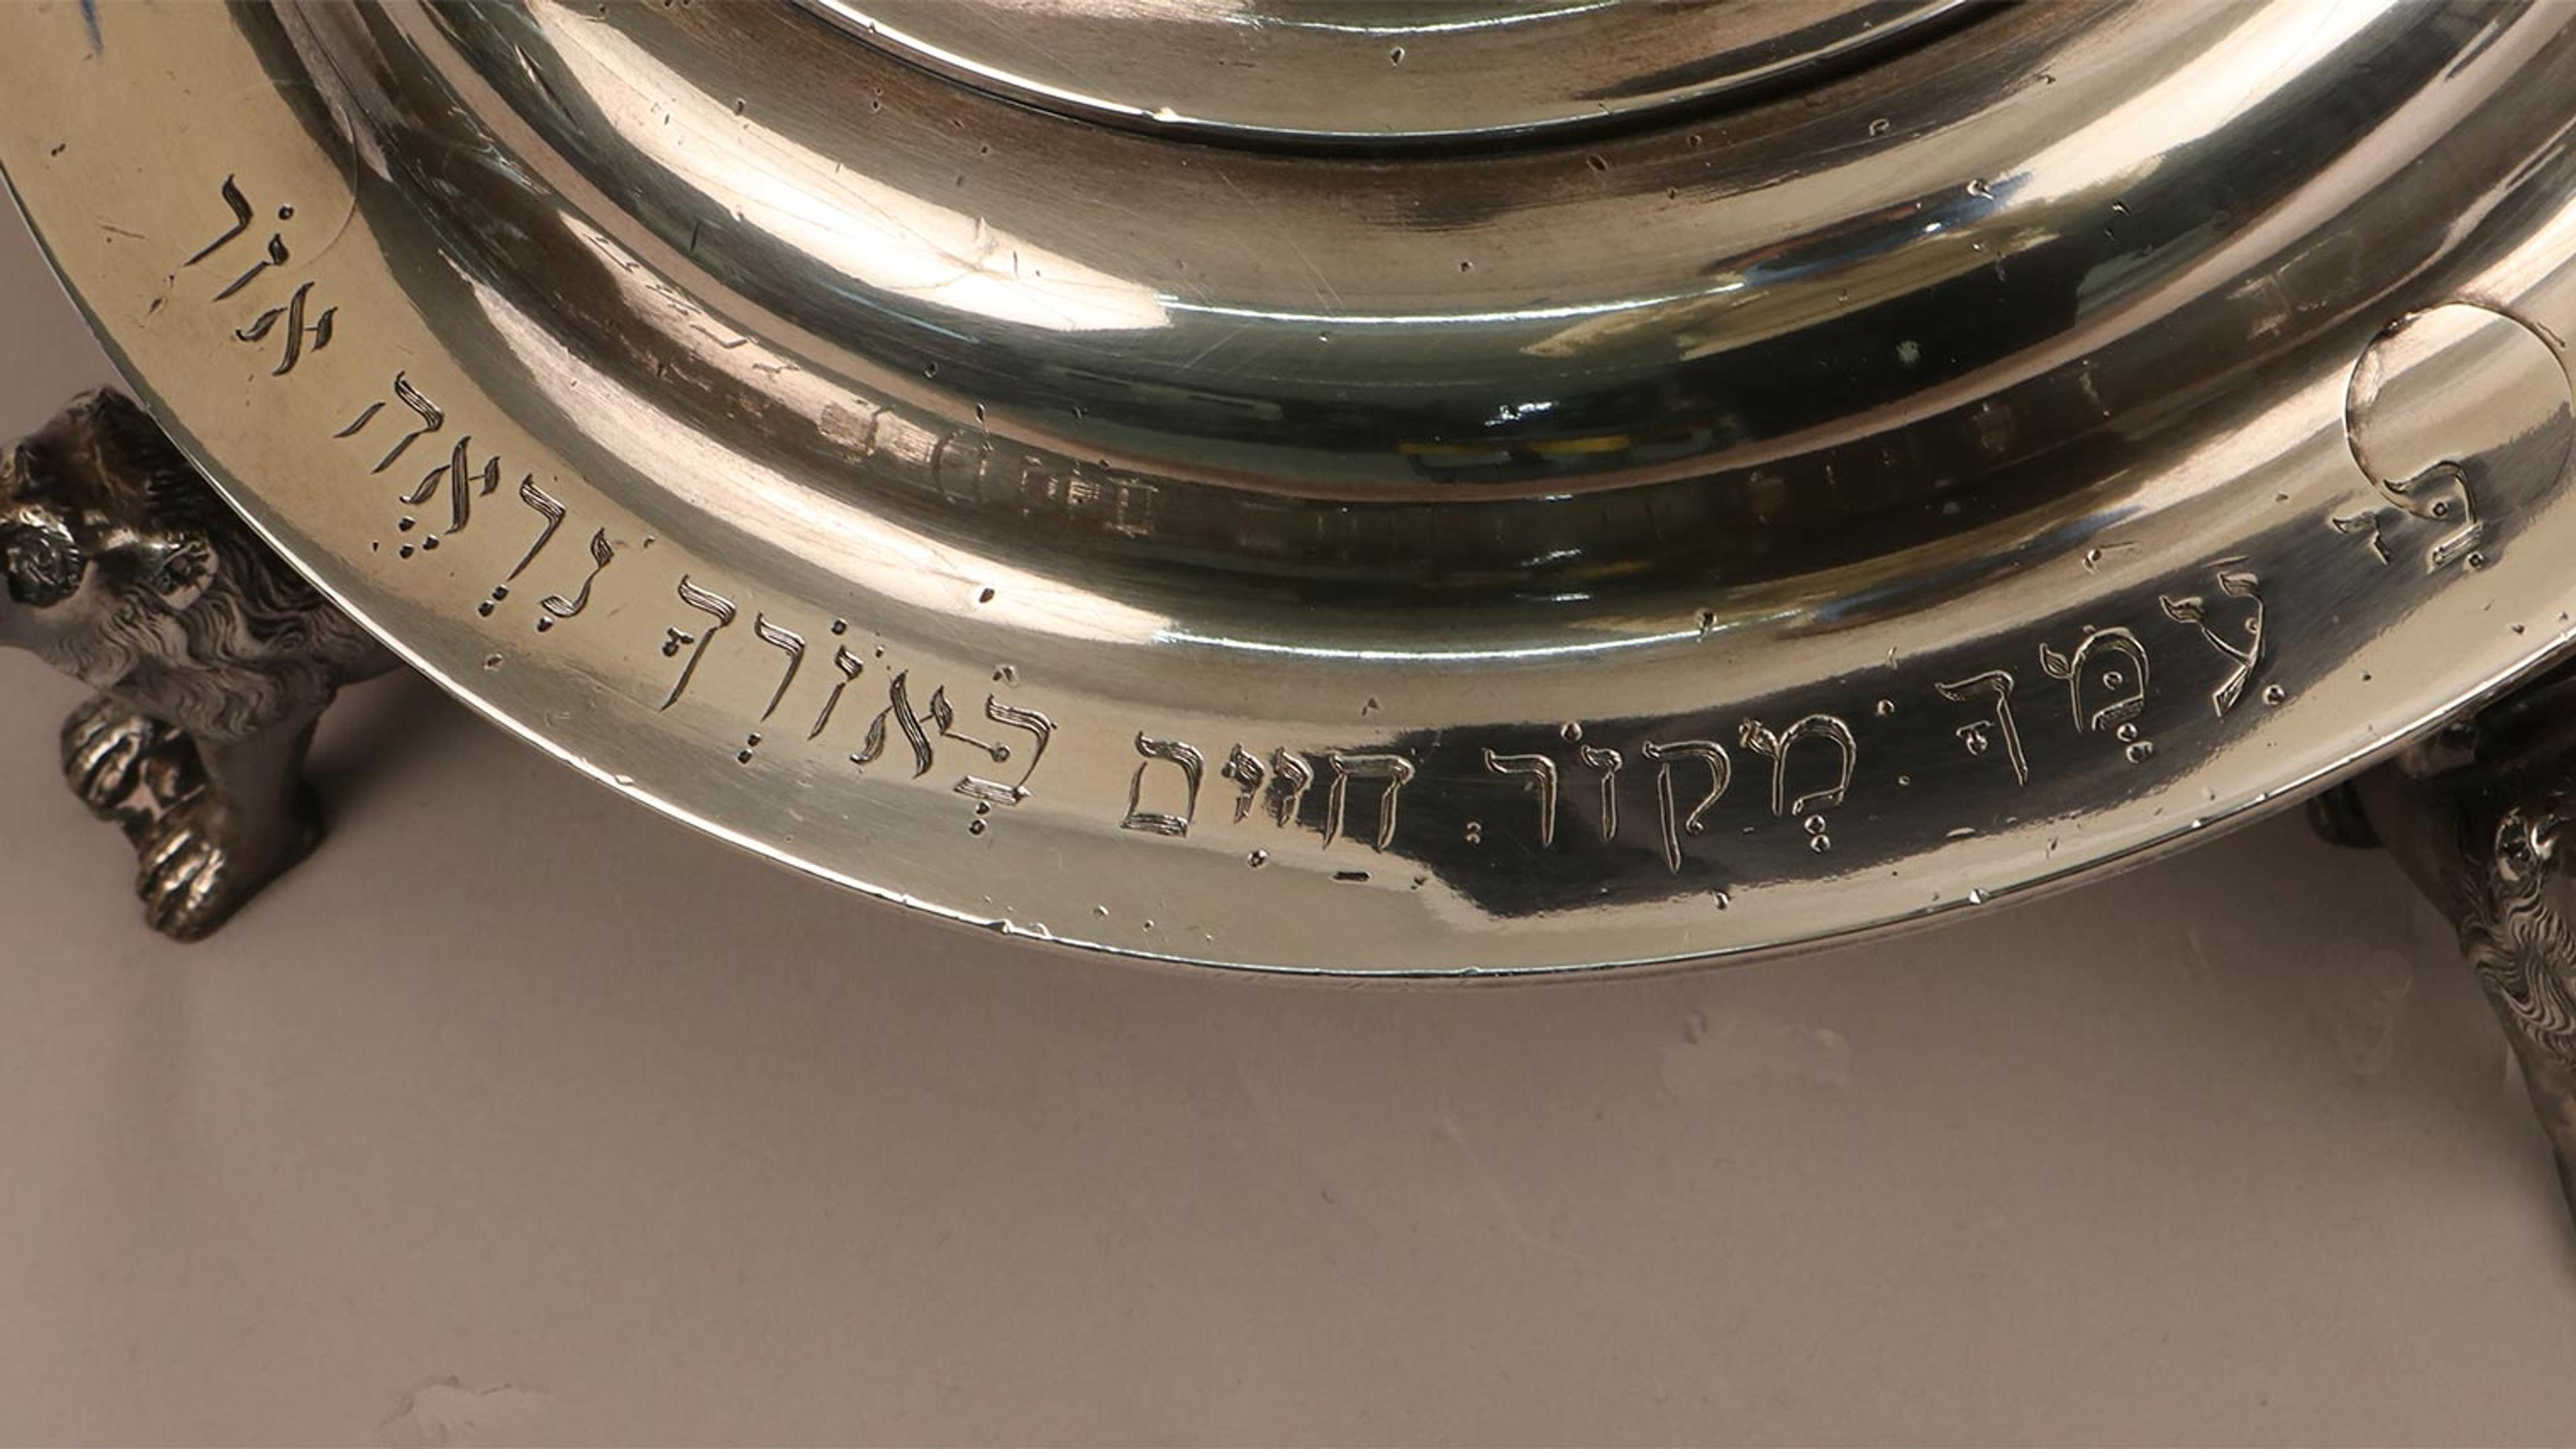 An inscription on the base of a silver lamp